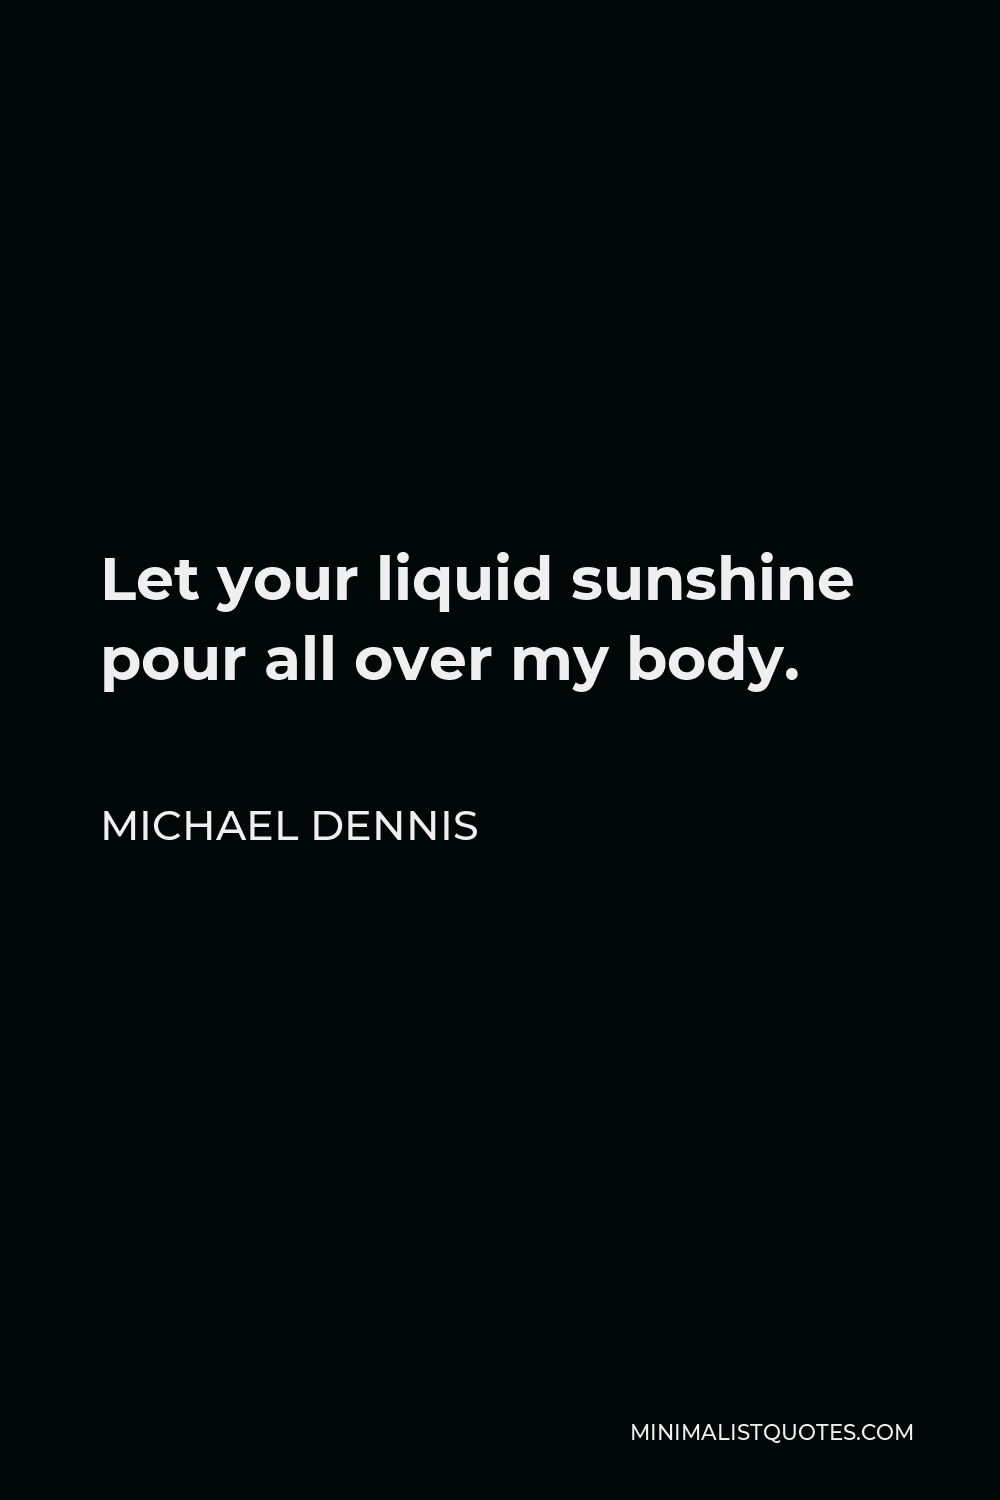 Michael Dennis Quote - Let your liquid sunshine pour all over my body.